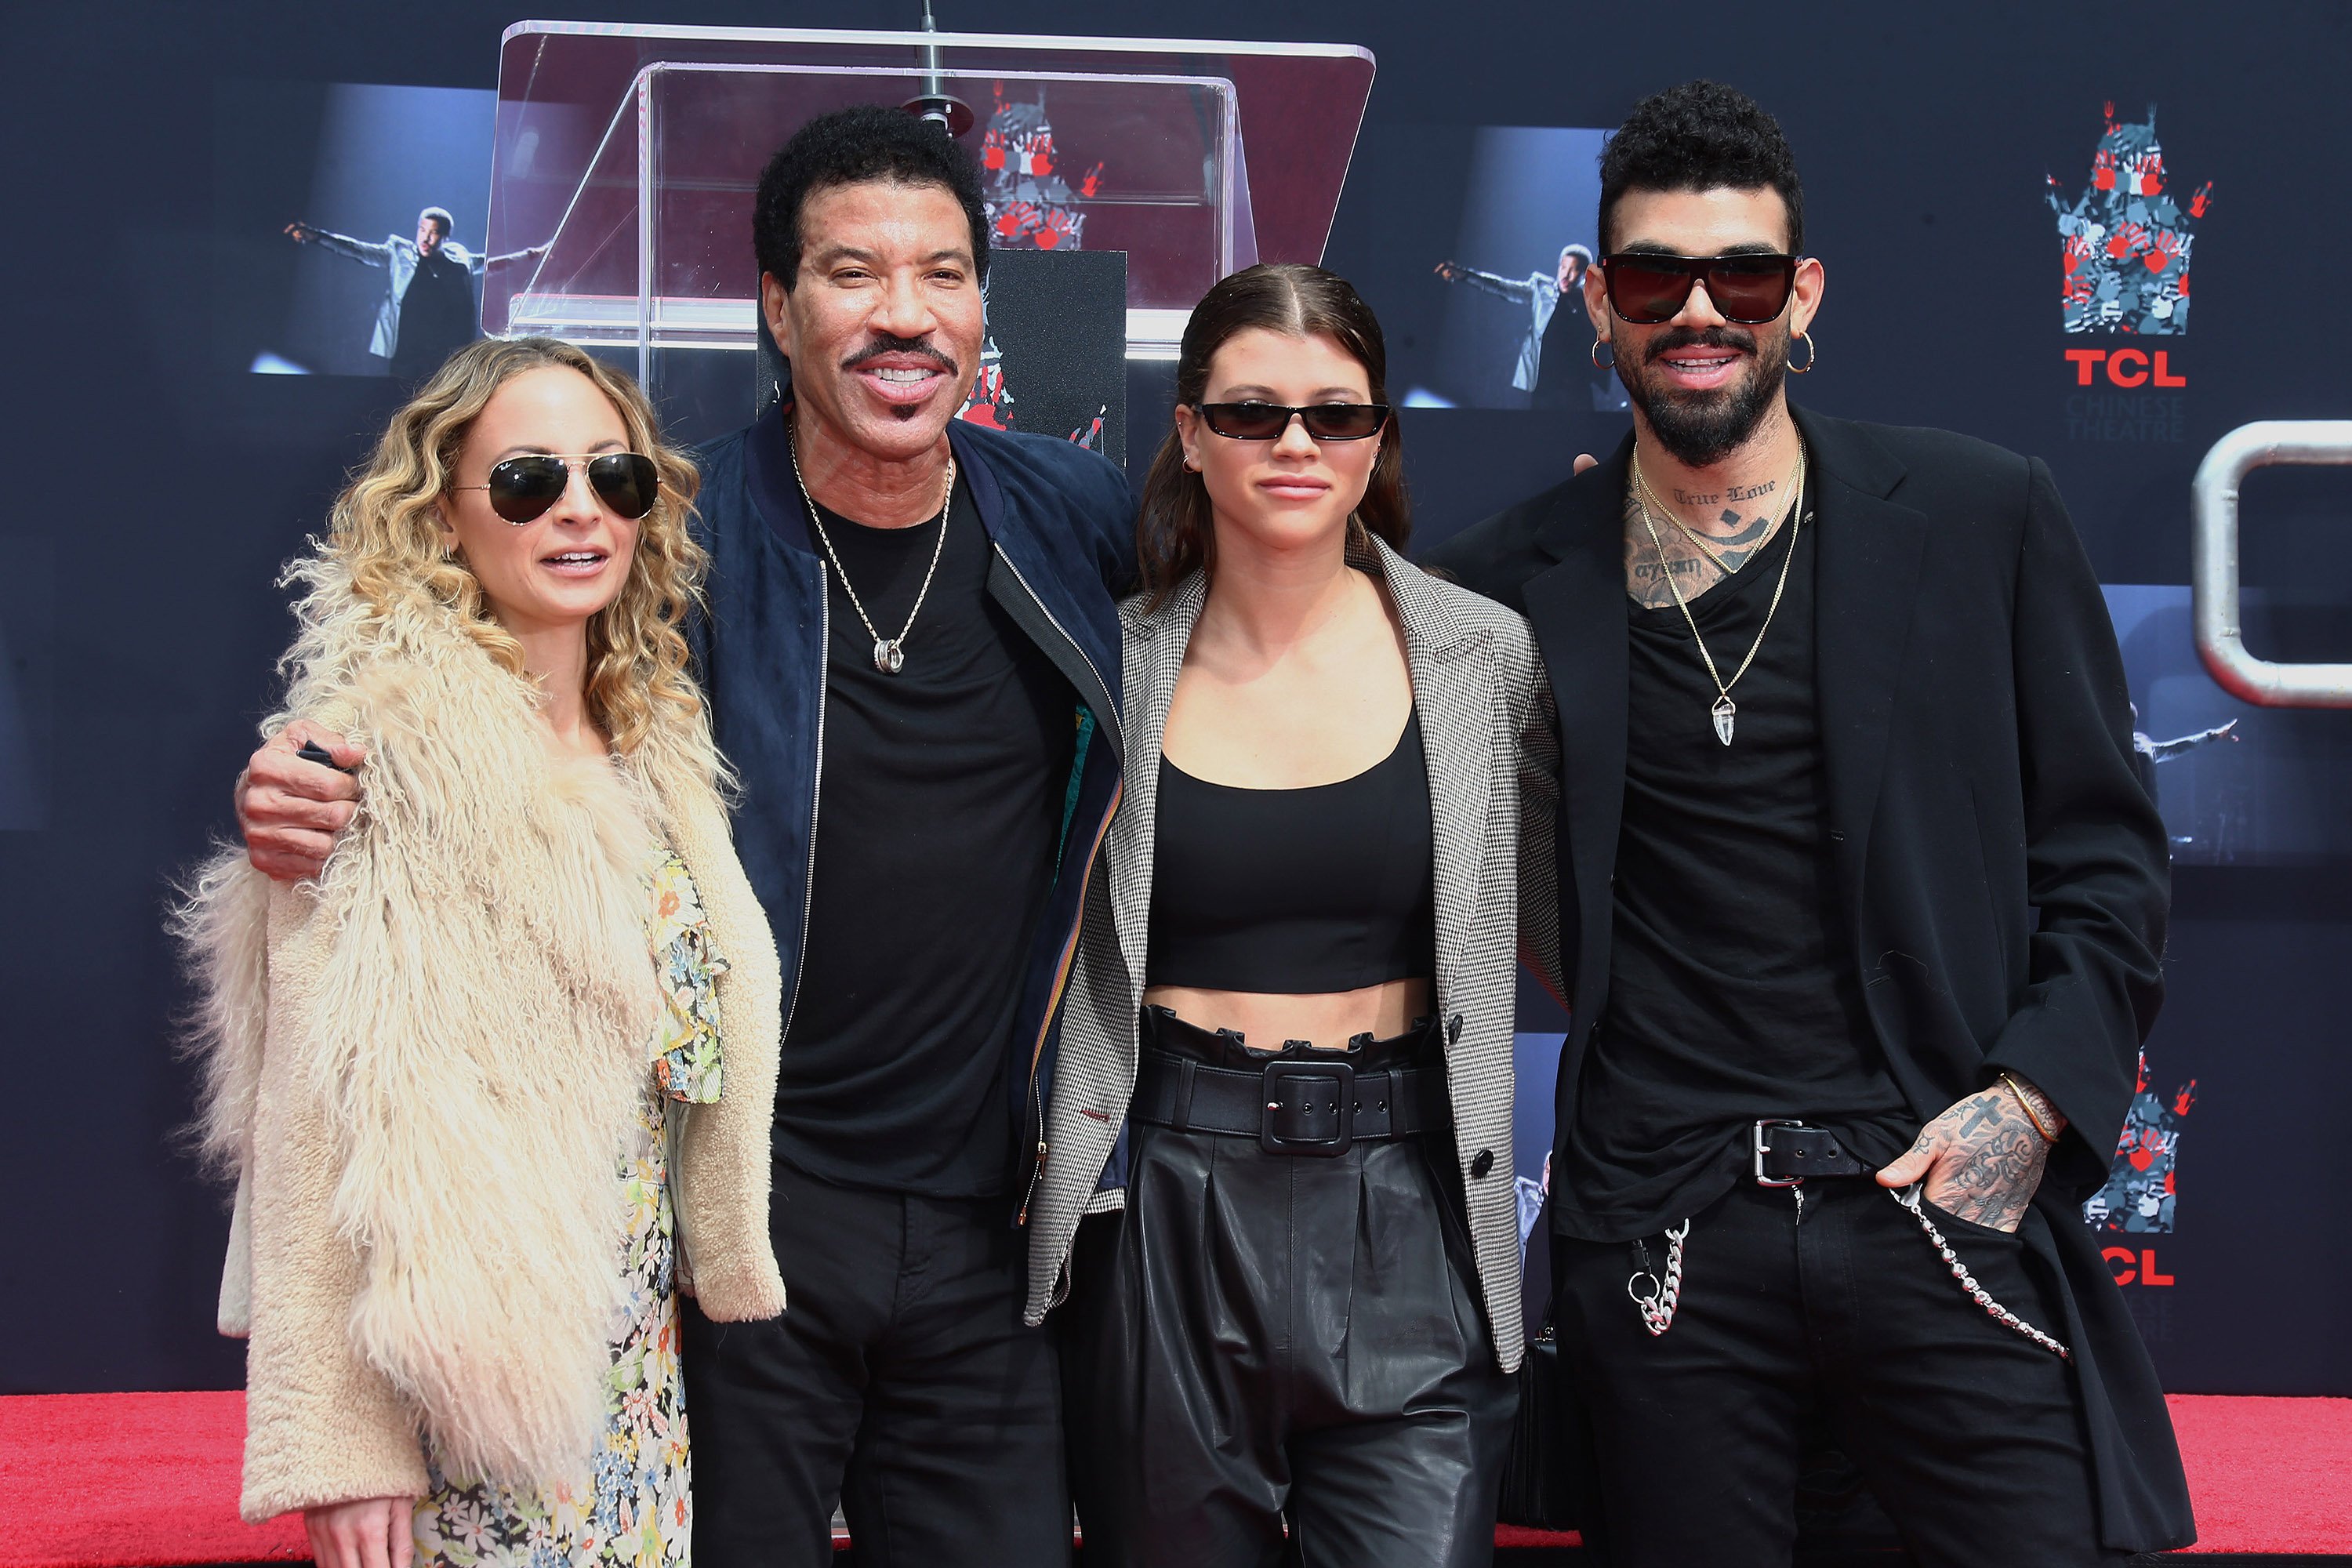 Nicole Richie, Lionel Richie, Sofia Richie and Miles Richie attend the Lionel Richie Hand And Footprint Ceremony at TCL Chinese Theatre on March 7, 2018 in Hollywood, California. | Photo: Getty Images/Global Images of Ukraine